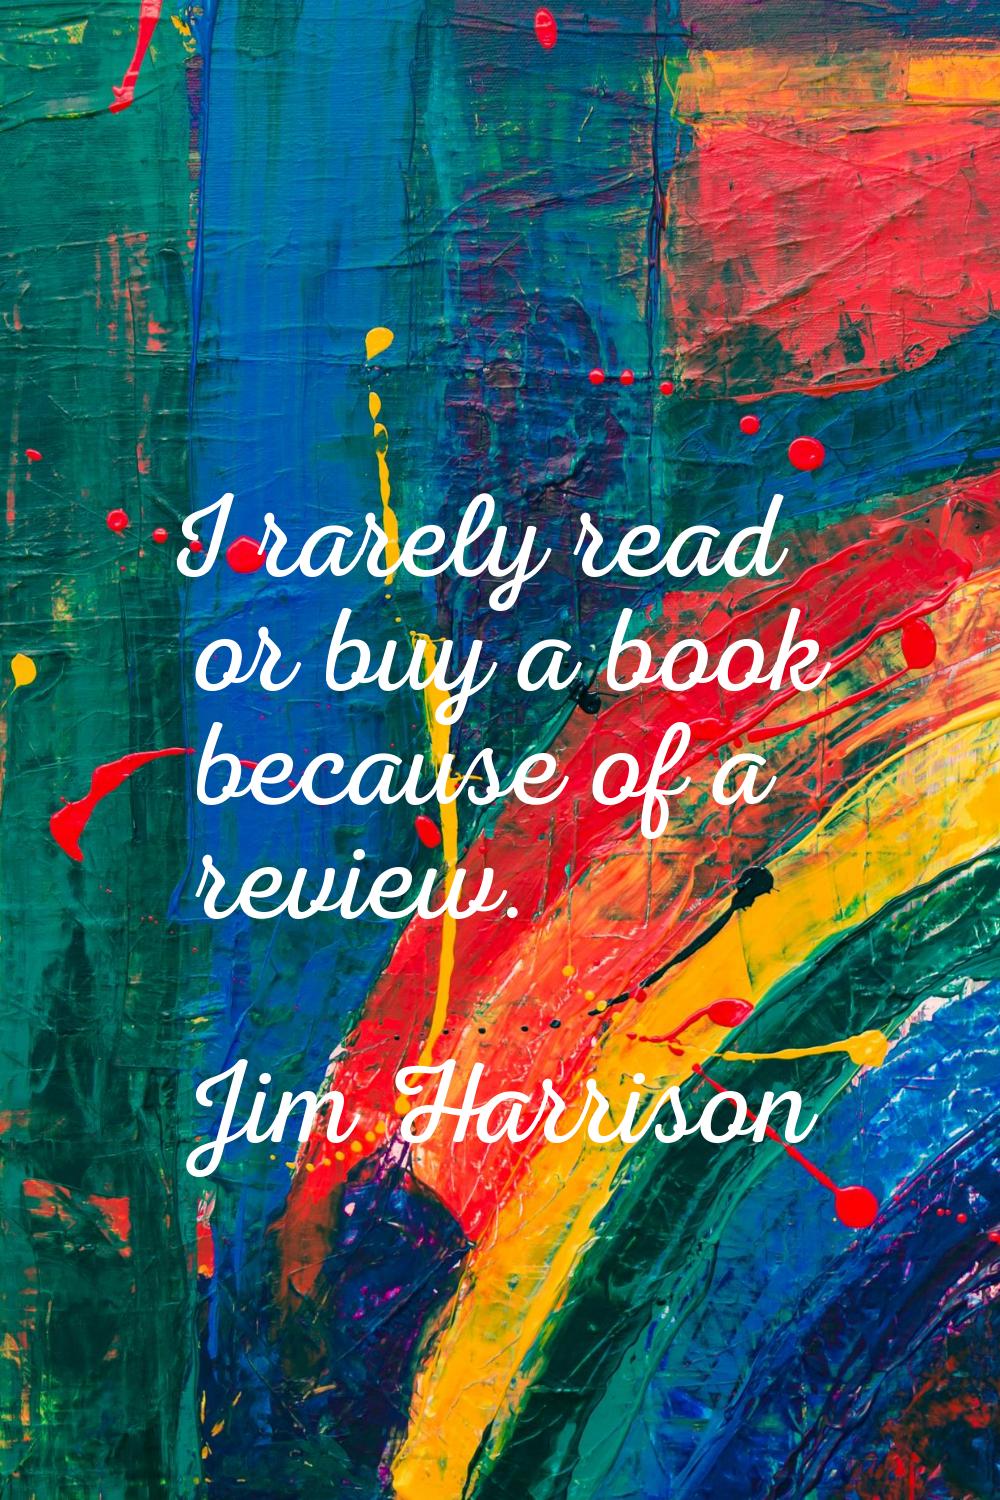 I rarely read or buy a book because of a review.